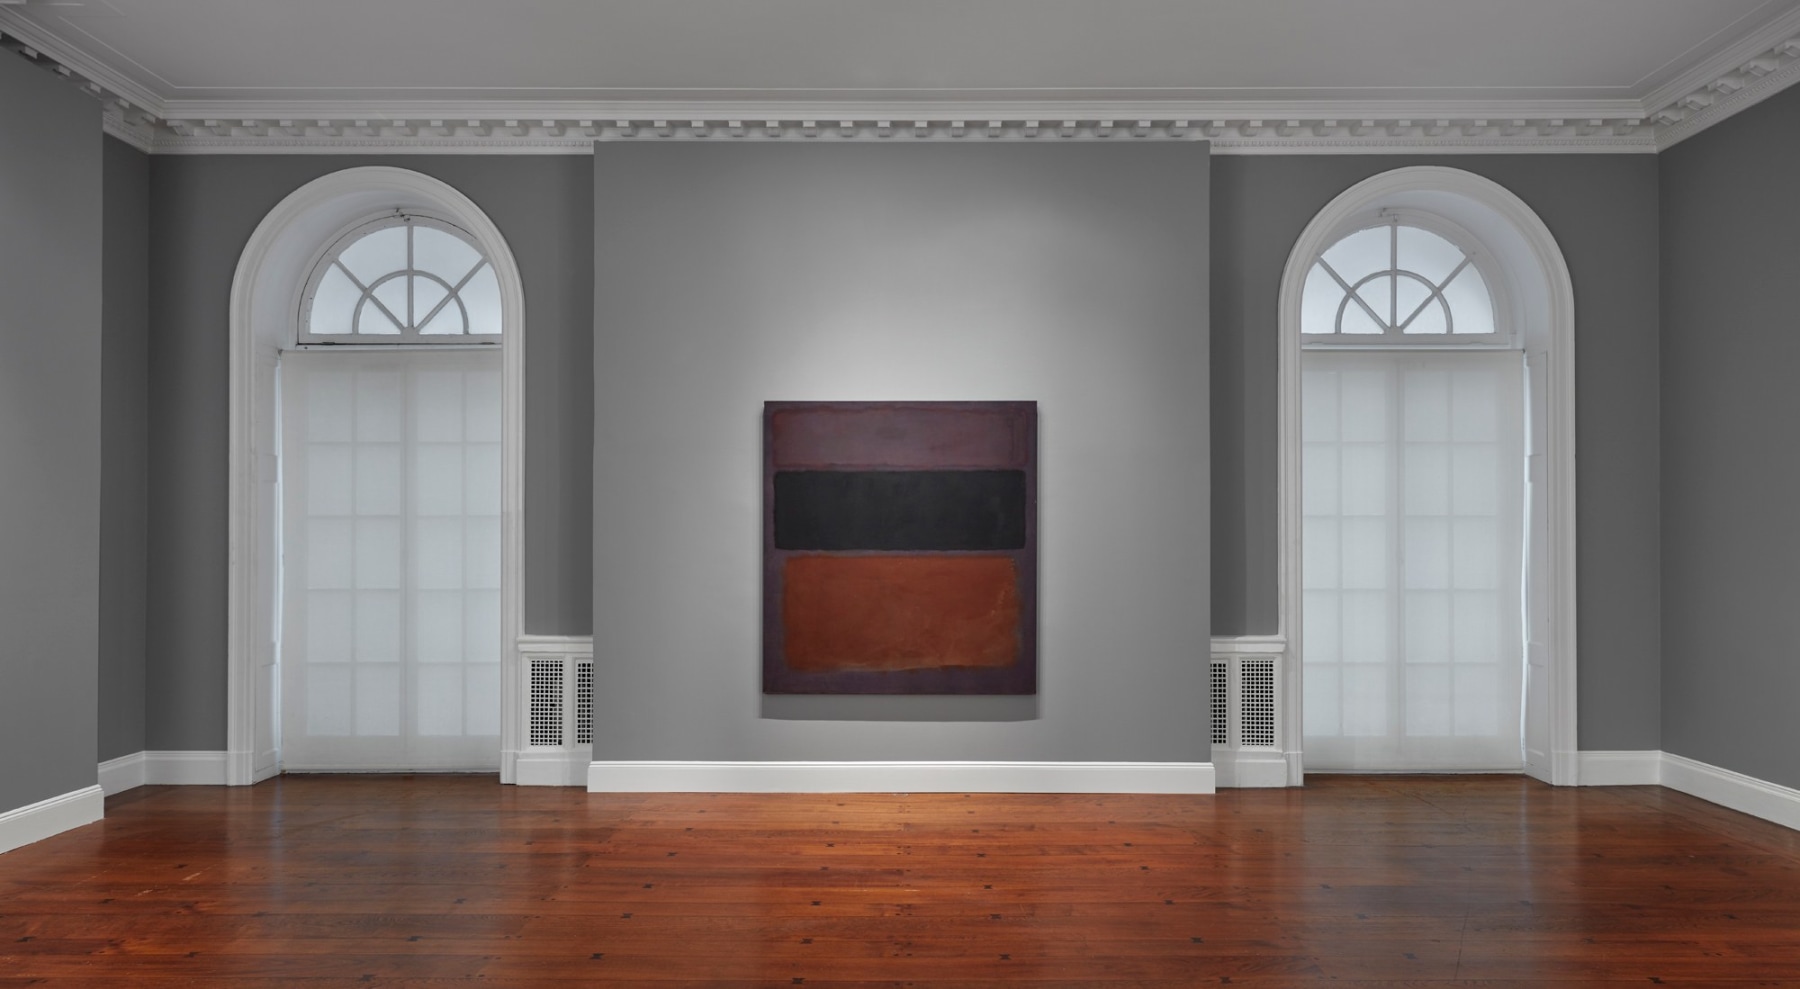 Photography by Tom Powel Imaging, Inc.

&amp;nbsp;

Reproduction, including downloading of Rothko Artworks is prohibited by copyright laws and international conventions without the express permission of the copyright holder.

Requests for reproduction should be directed to Artists Rights Society (ARS), New York.